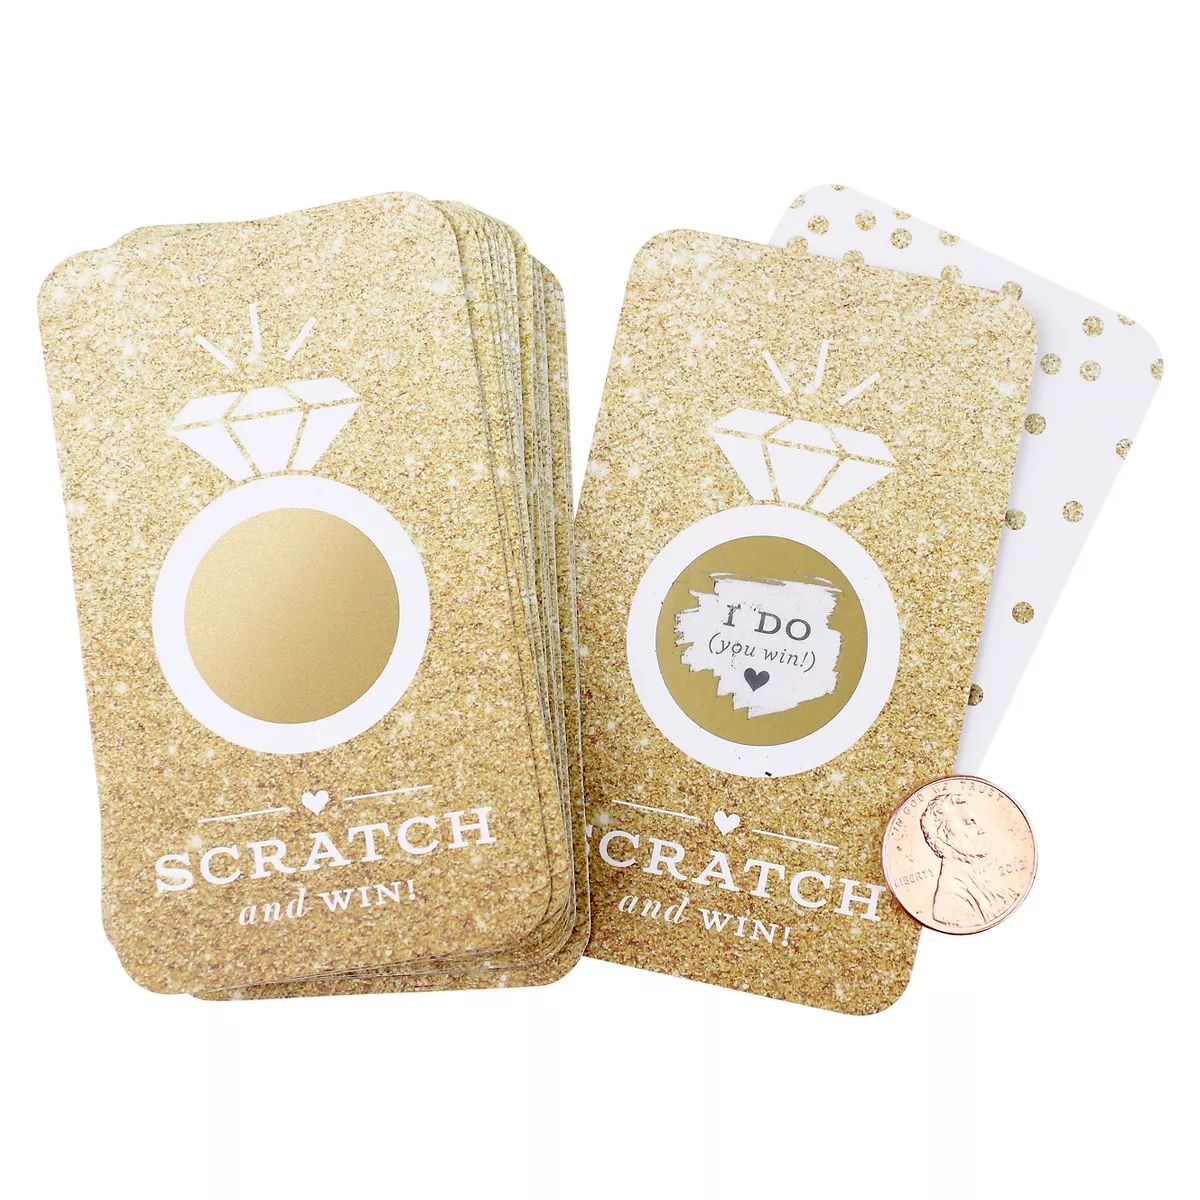 24ct Faux Glitter Scratch-off Game Cards | Target